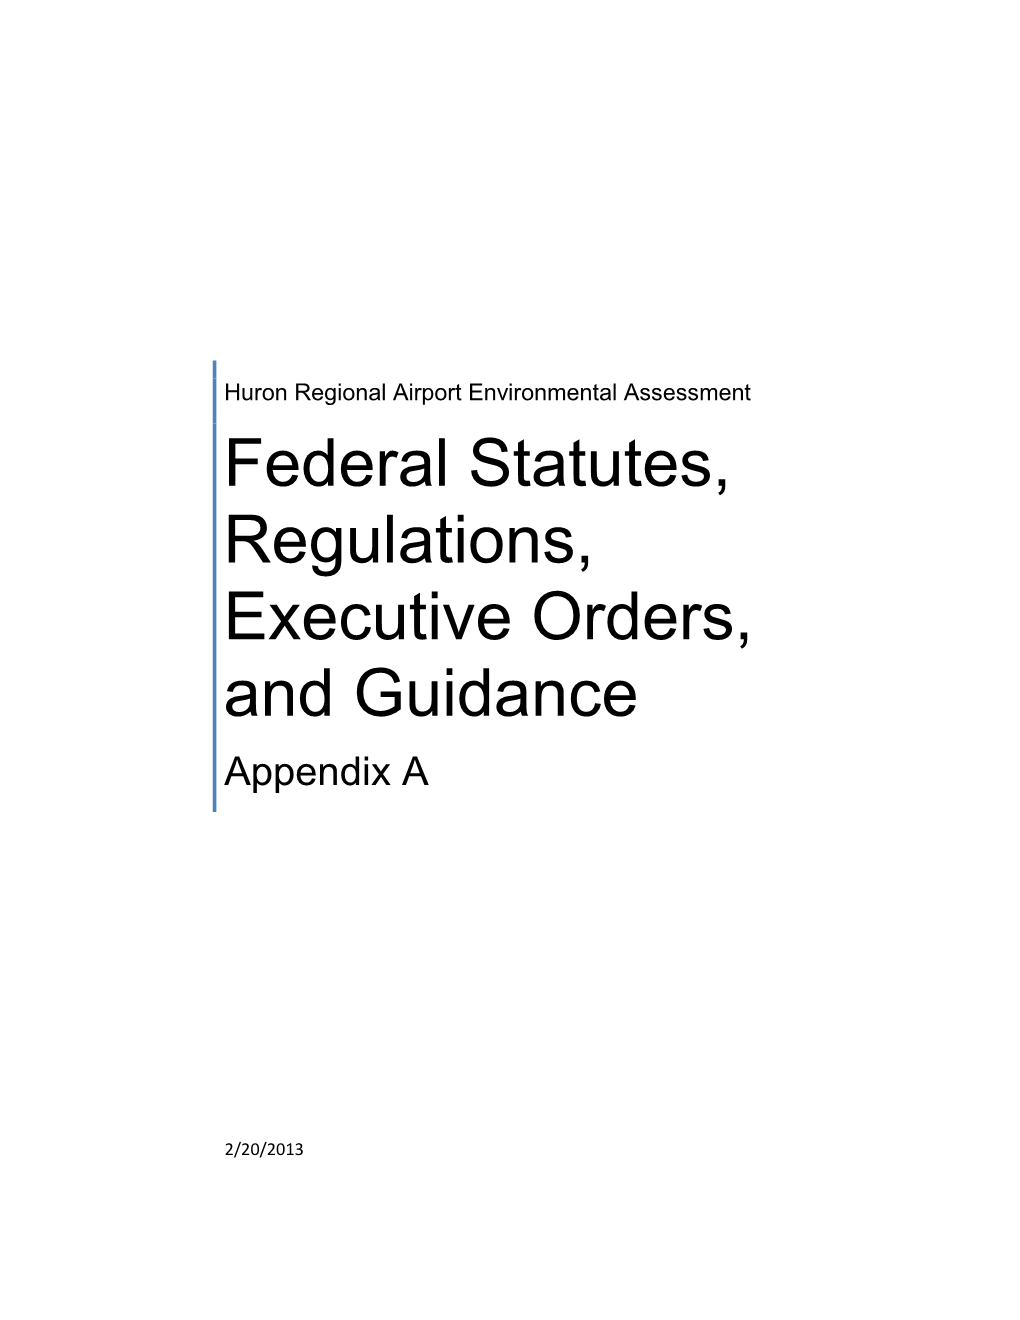 Federal Statutes, Regulations, Executive Orders, and Guidance